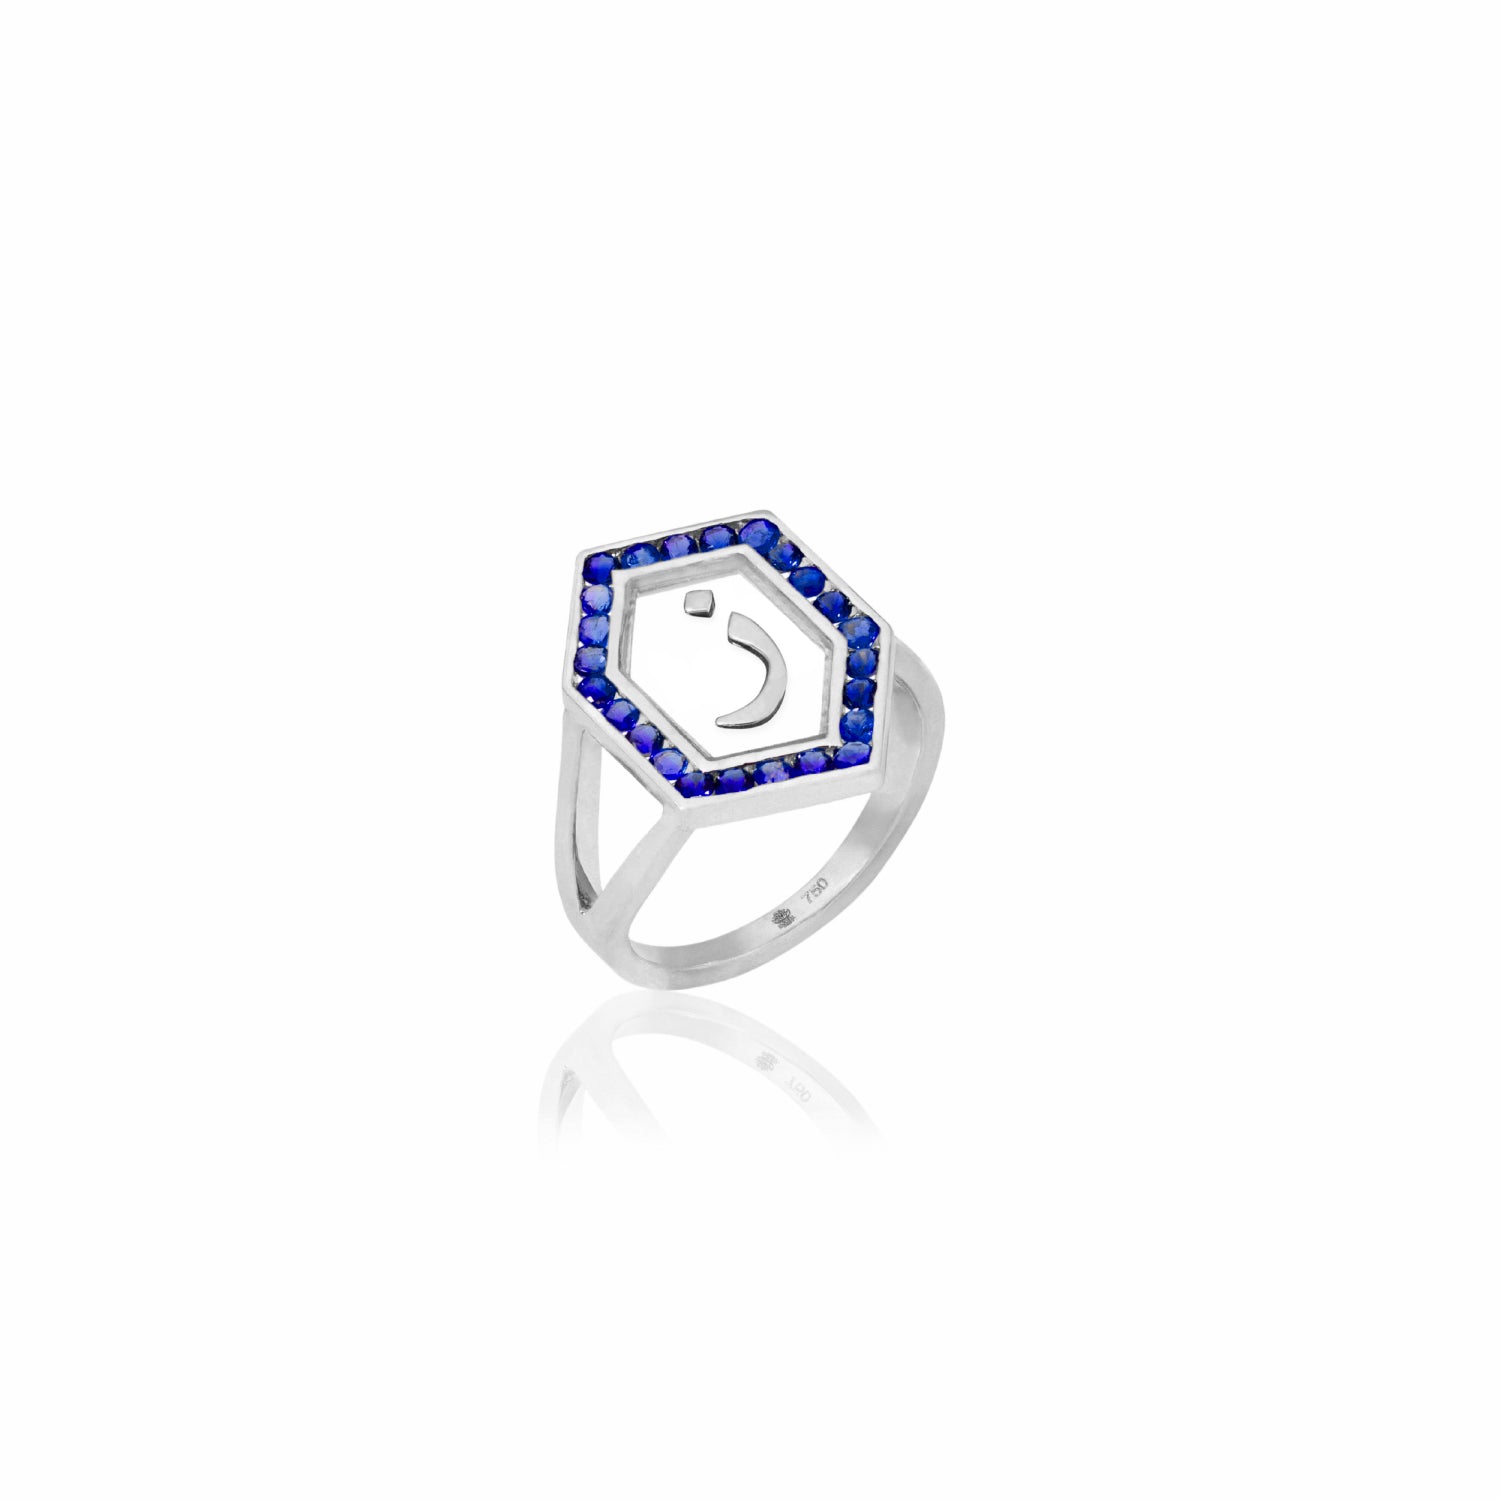 Qamoos 1.0 Letter ز Sapphire Ring in White Gold